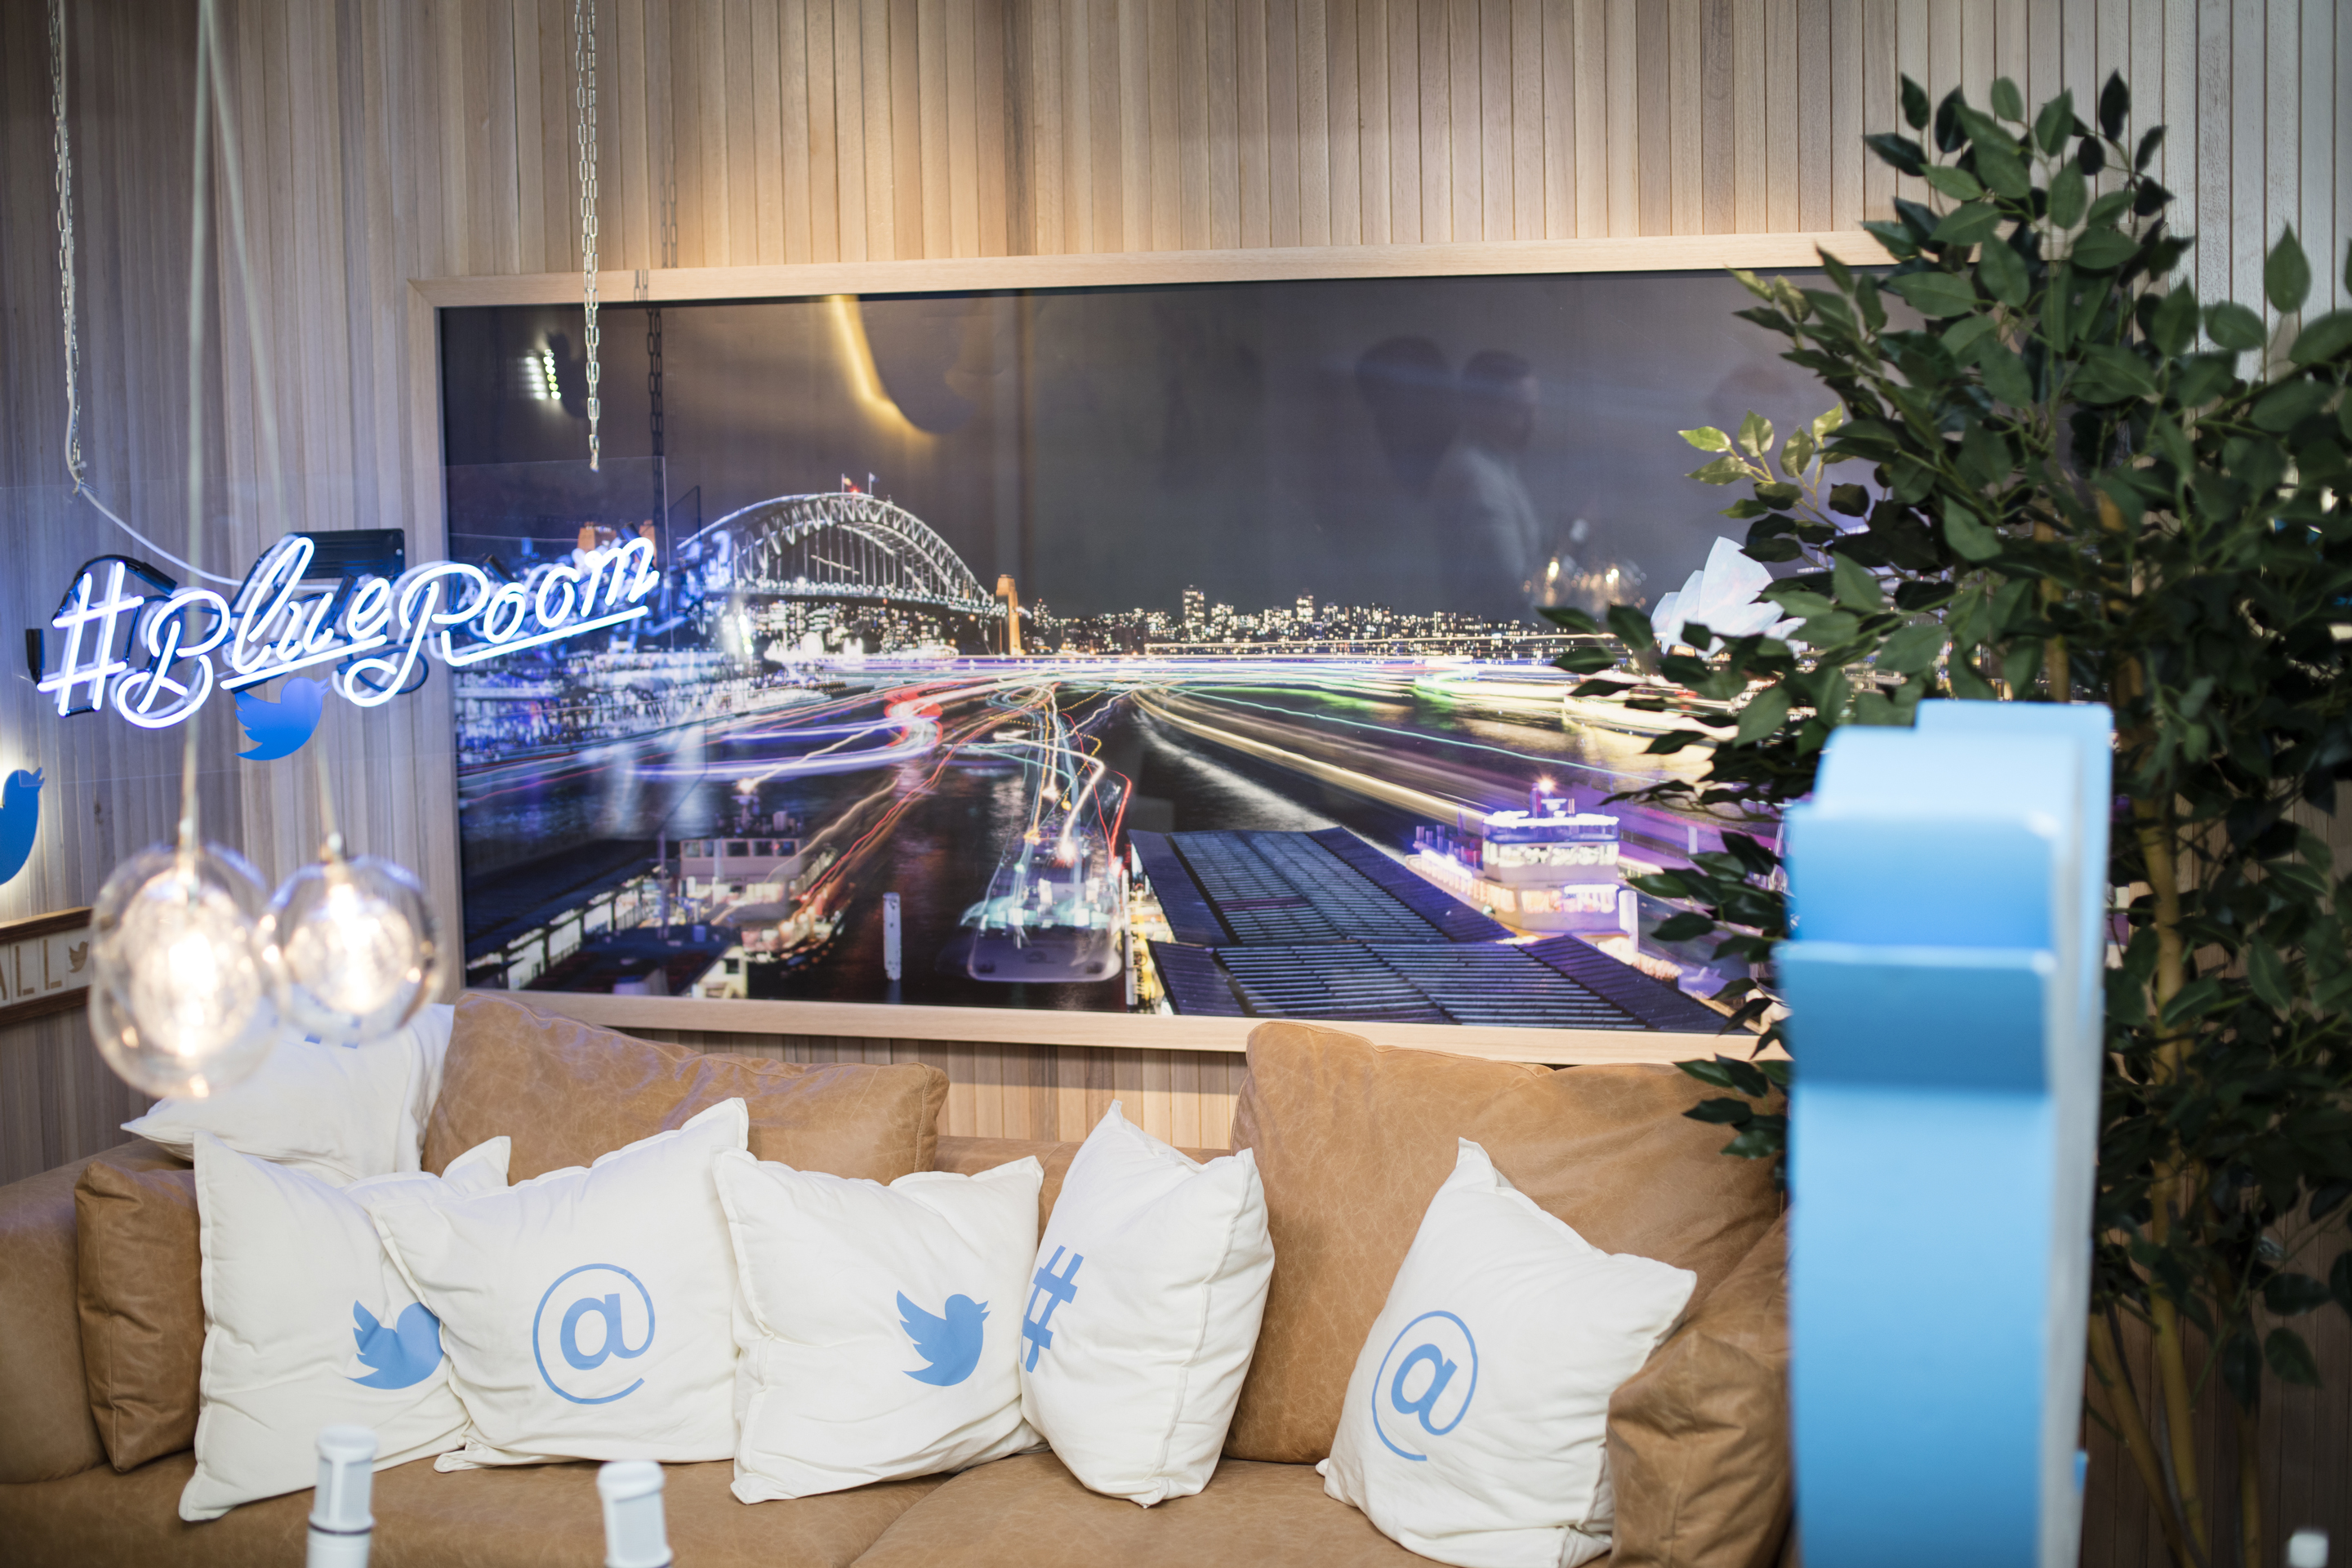 Feature: Twitter Australia’s Blue Room gets picked up globally